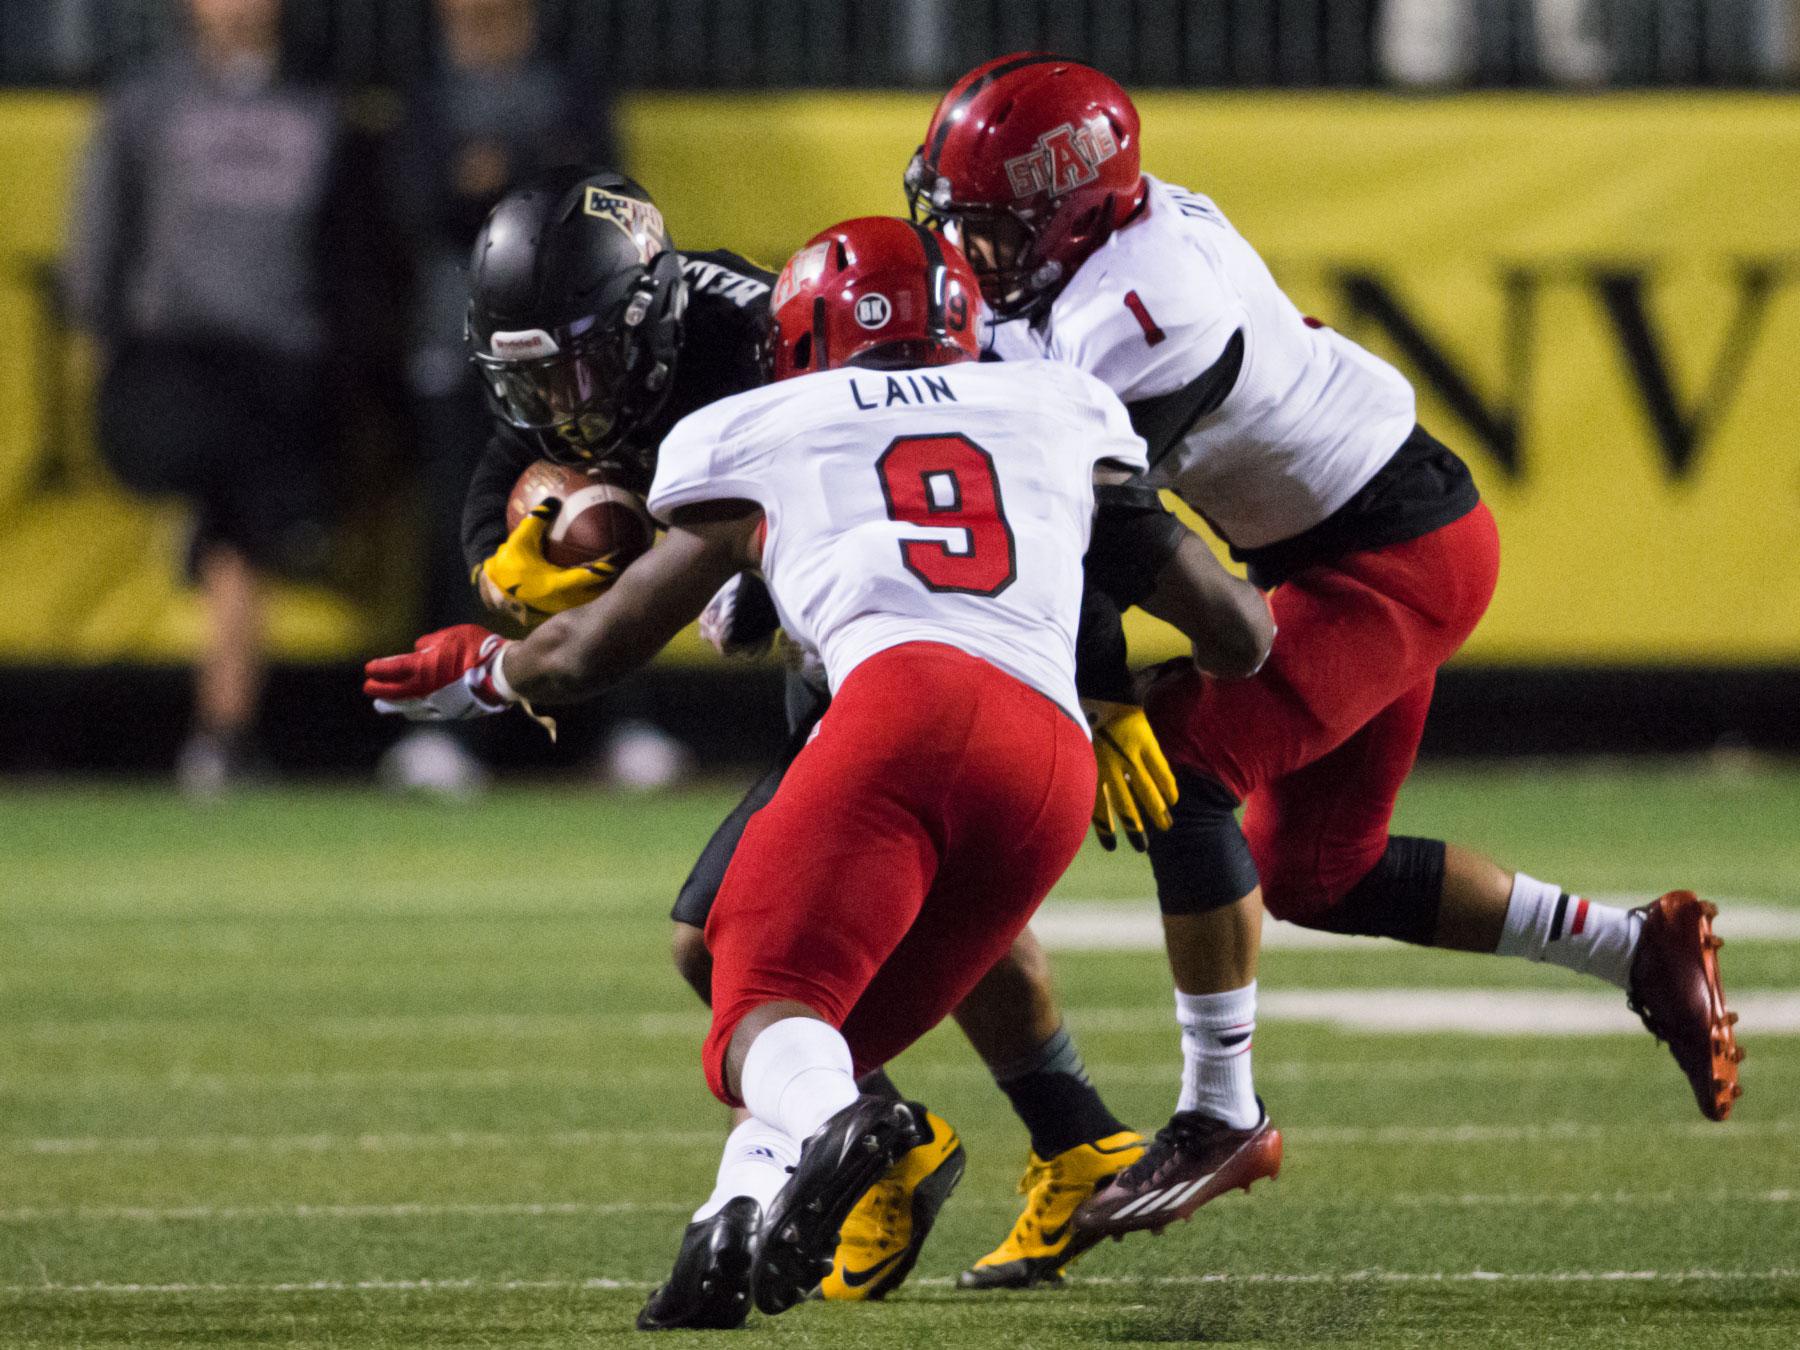 Wide receiver Shaedon Meadors is tackled by two Arkansas State defenders during Thursday nights 40-27 loss. With the win, Arkansas State now has sole possession of first place in the Sun Belt.